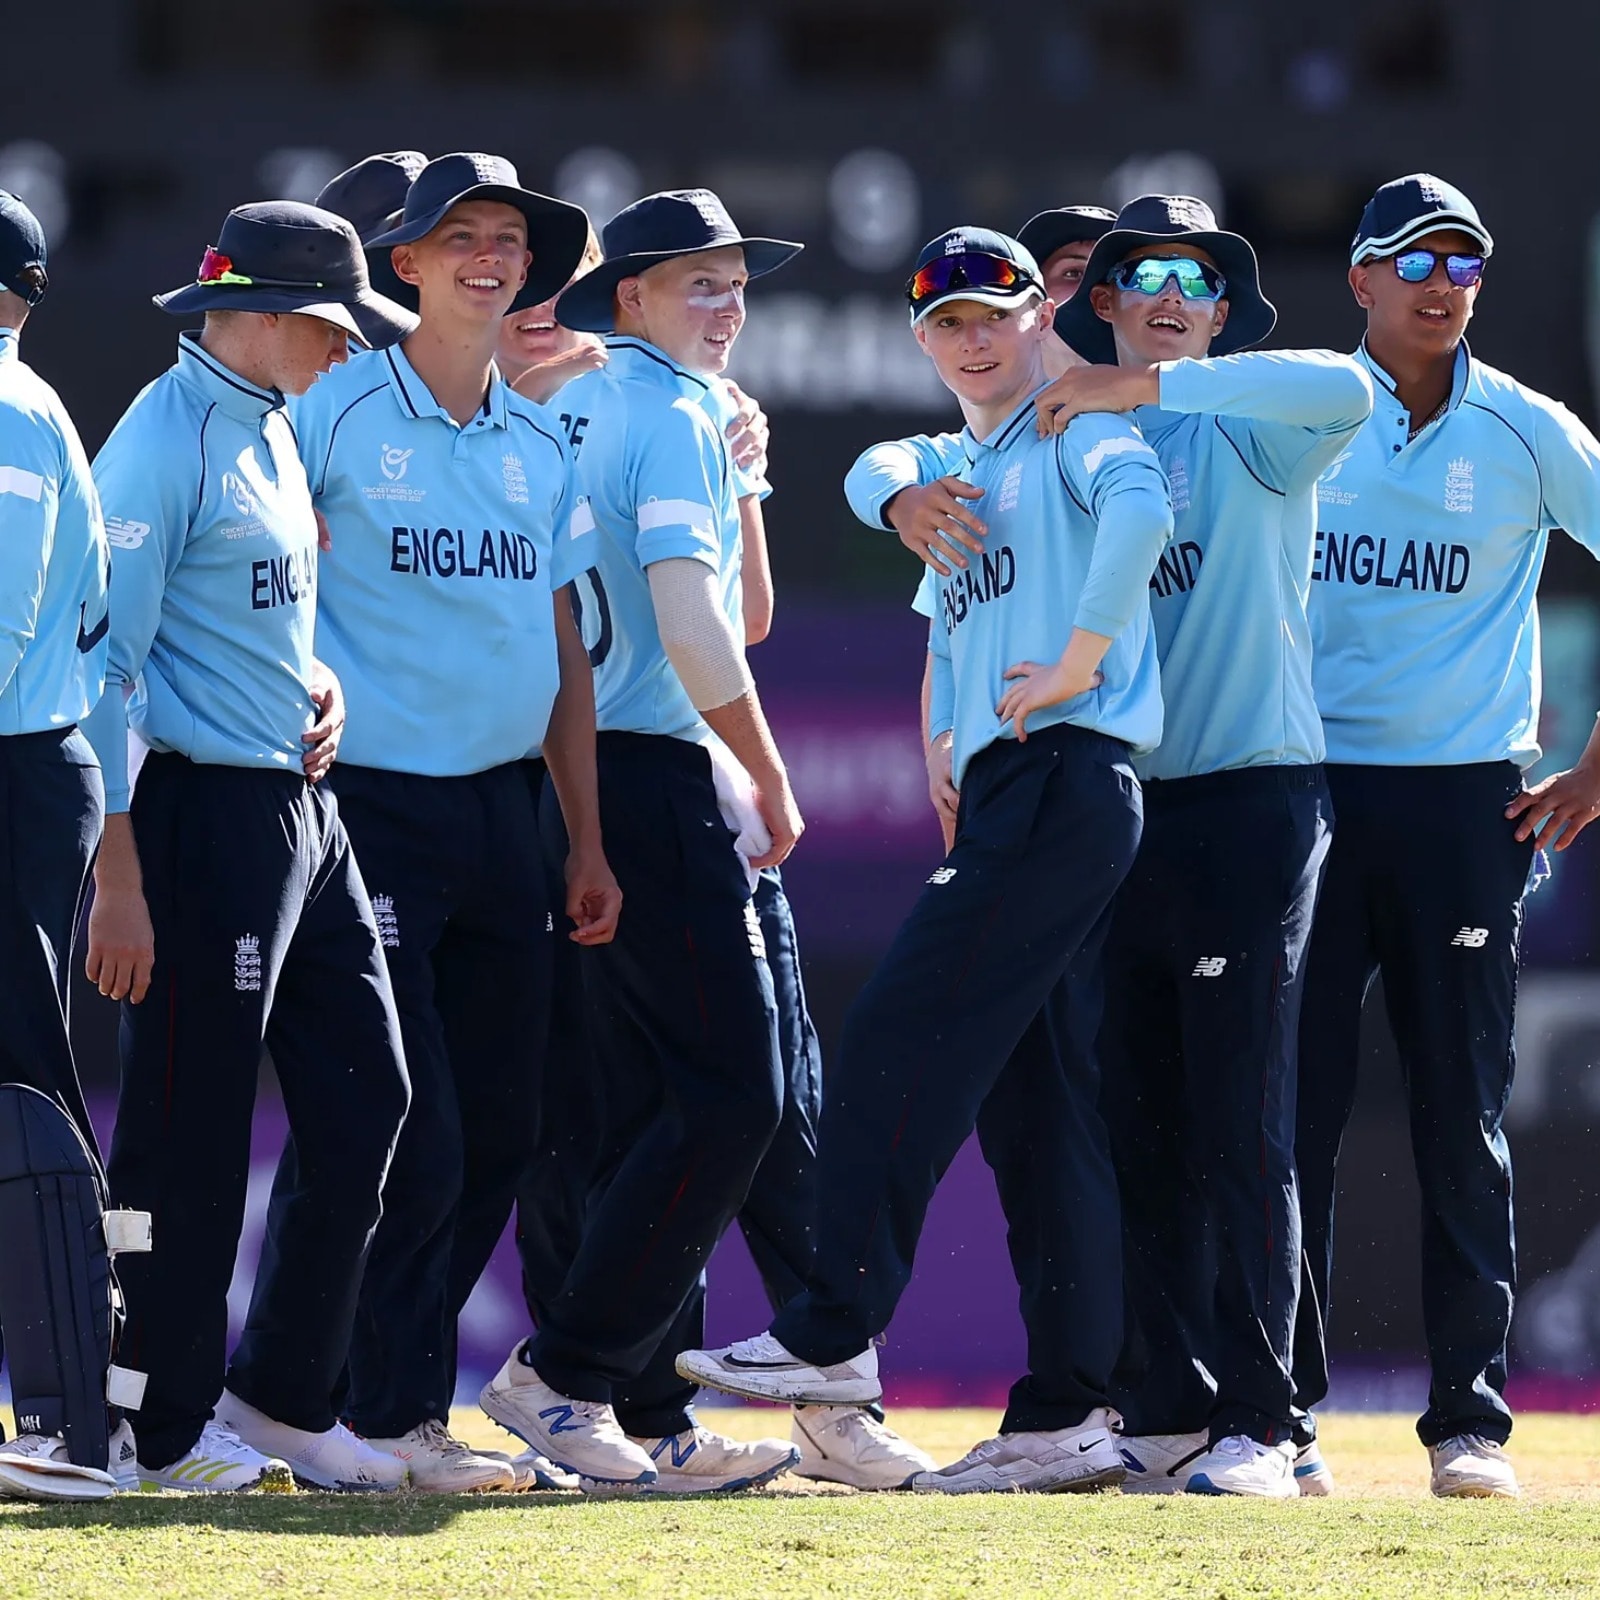 England U 19 Vs Canada U 19 Live Cricket Score Under 19 World Cup Live Updates From St Kitts